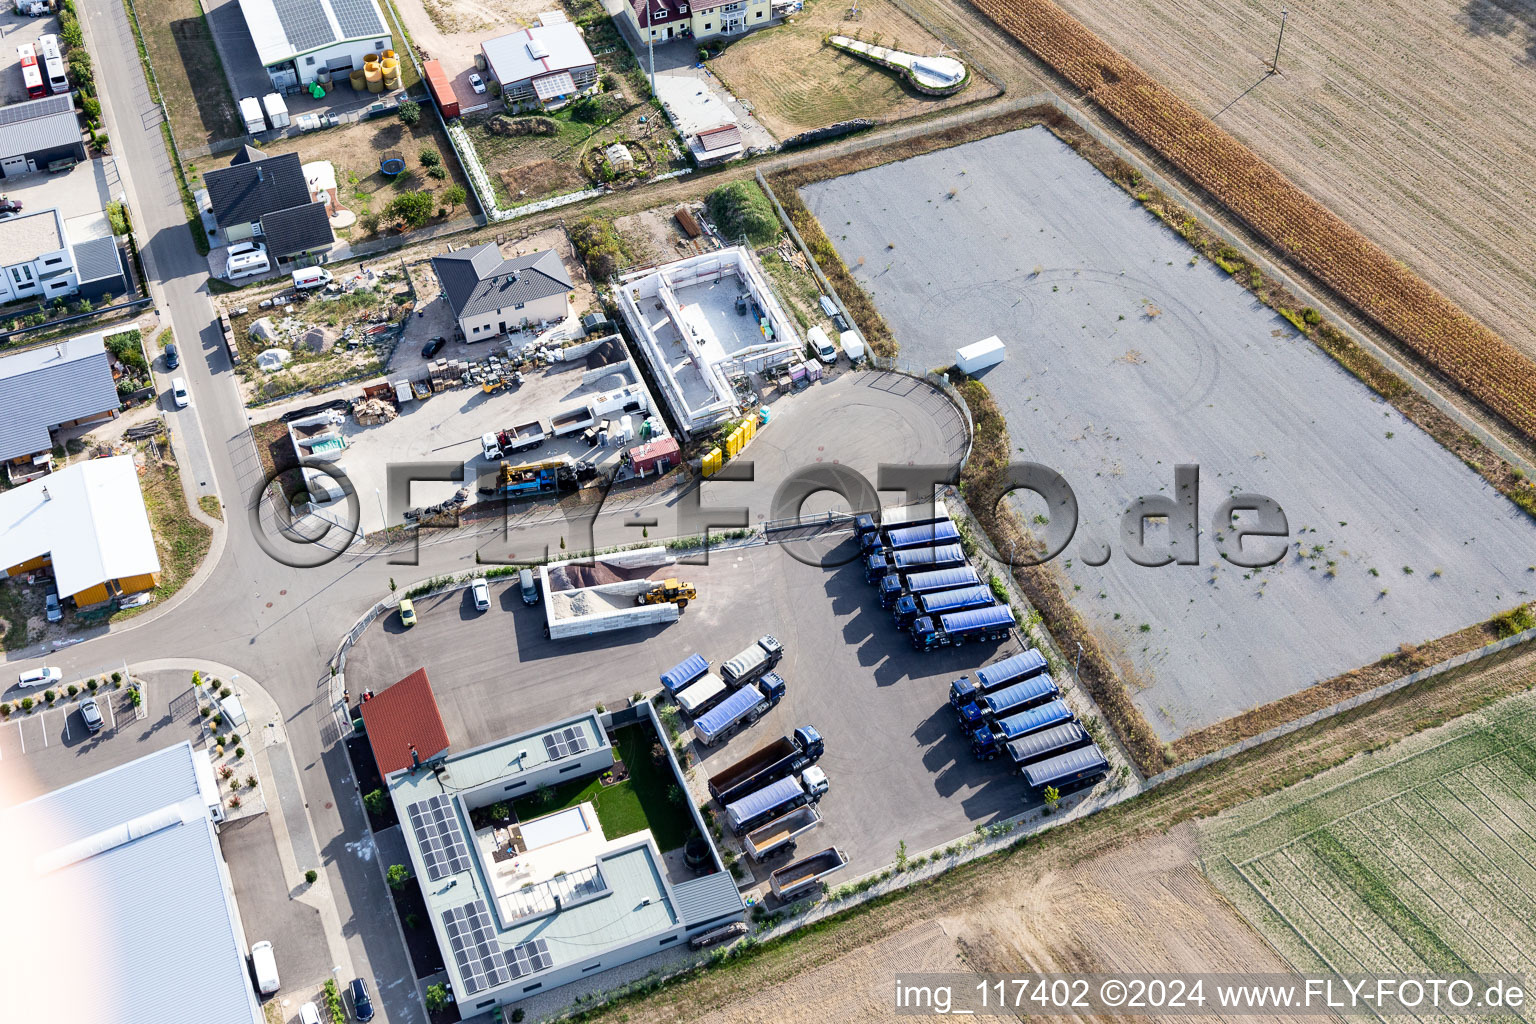 Industrial estate and company settlement in Hatzenbuehl in the state Rhineland-Palatinate, Germany